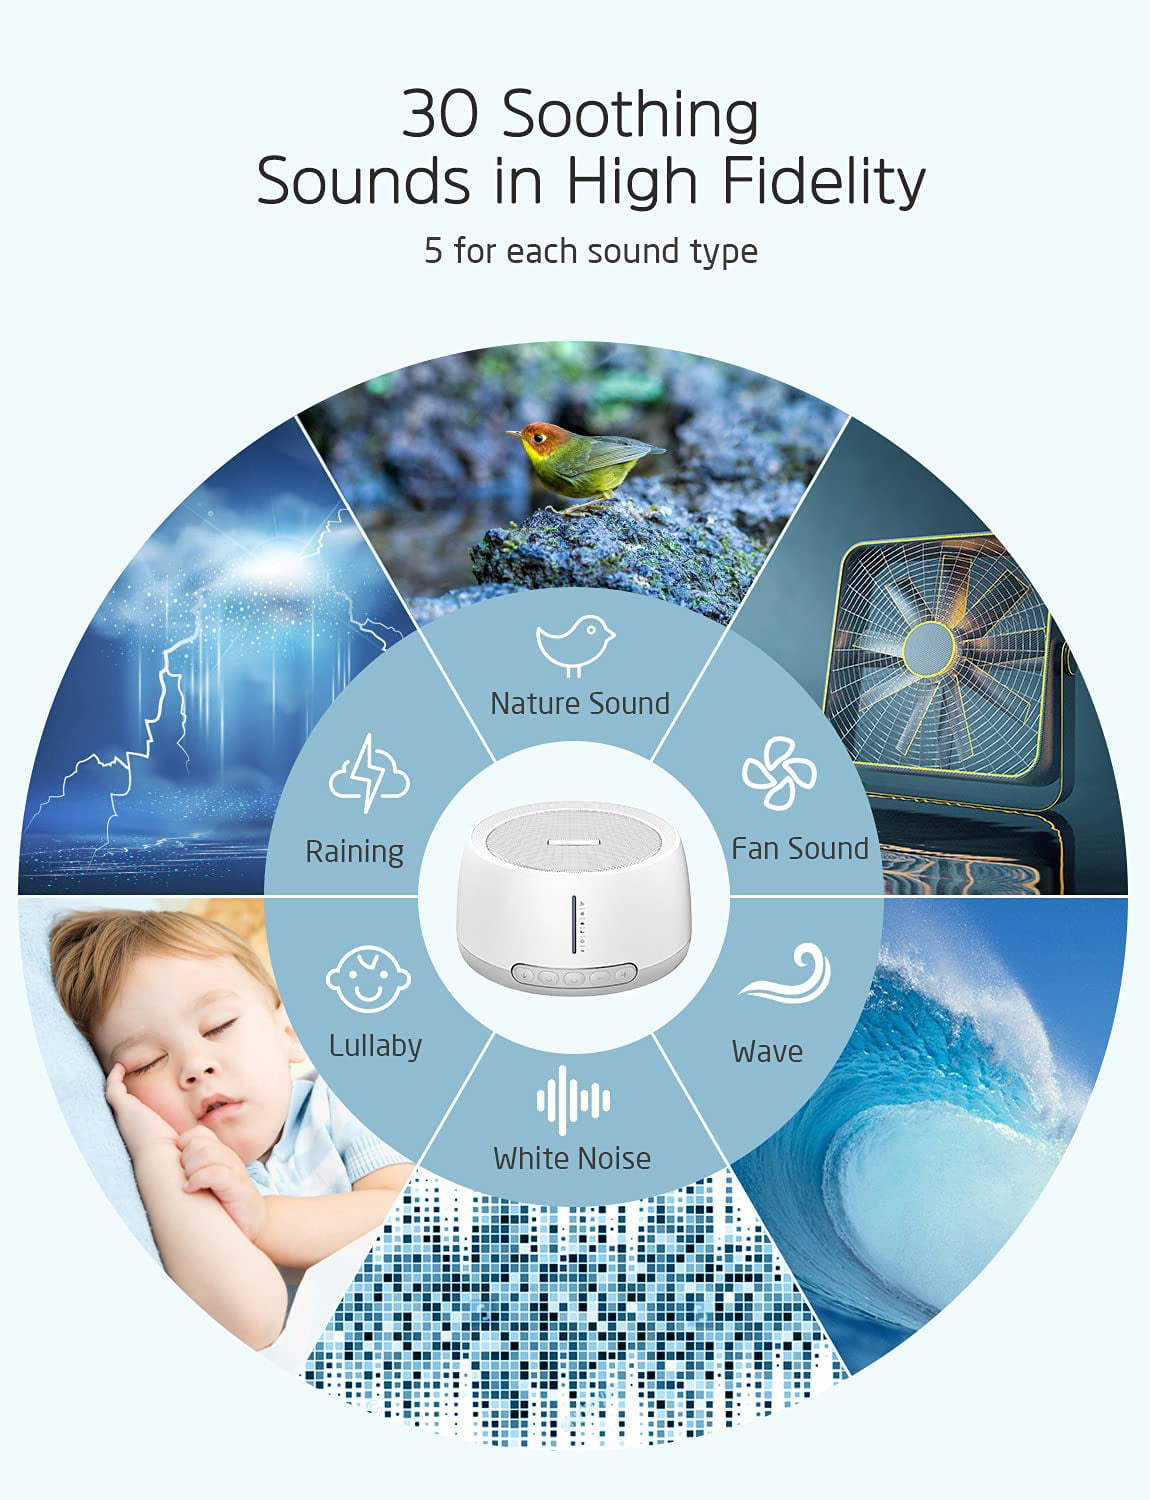 Adapter Not Included Up to 100dB PICTEK White Noise Machine USB Powered Sound Therapy 3 Auto-Off Timer & Memory Function 30 Non-Looping Soothing Sound Machine for Nursery Office Privacy